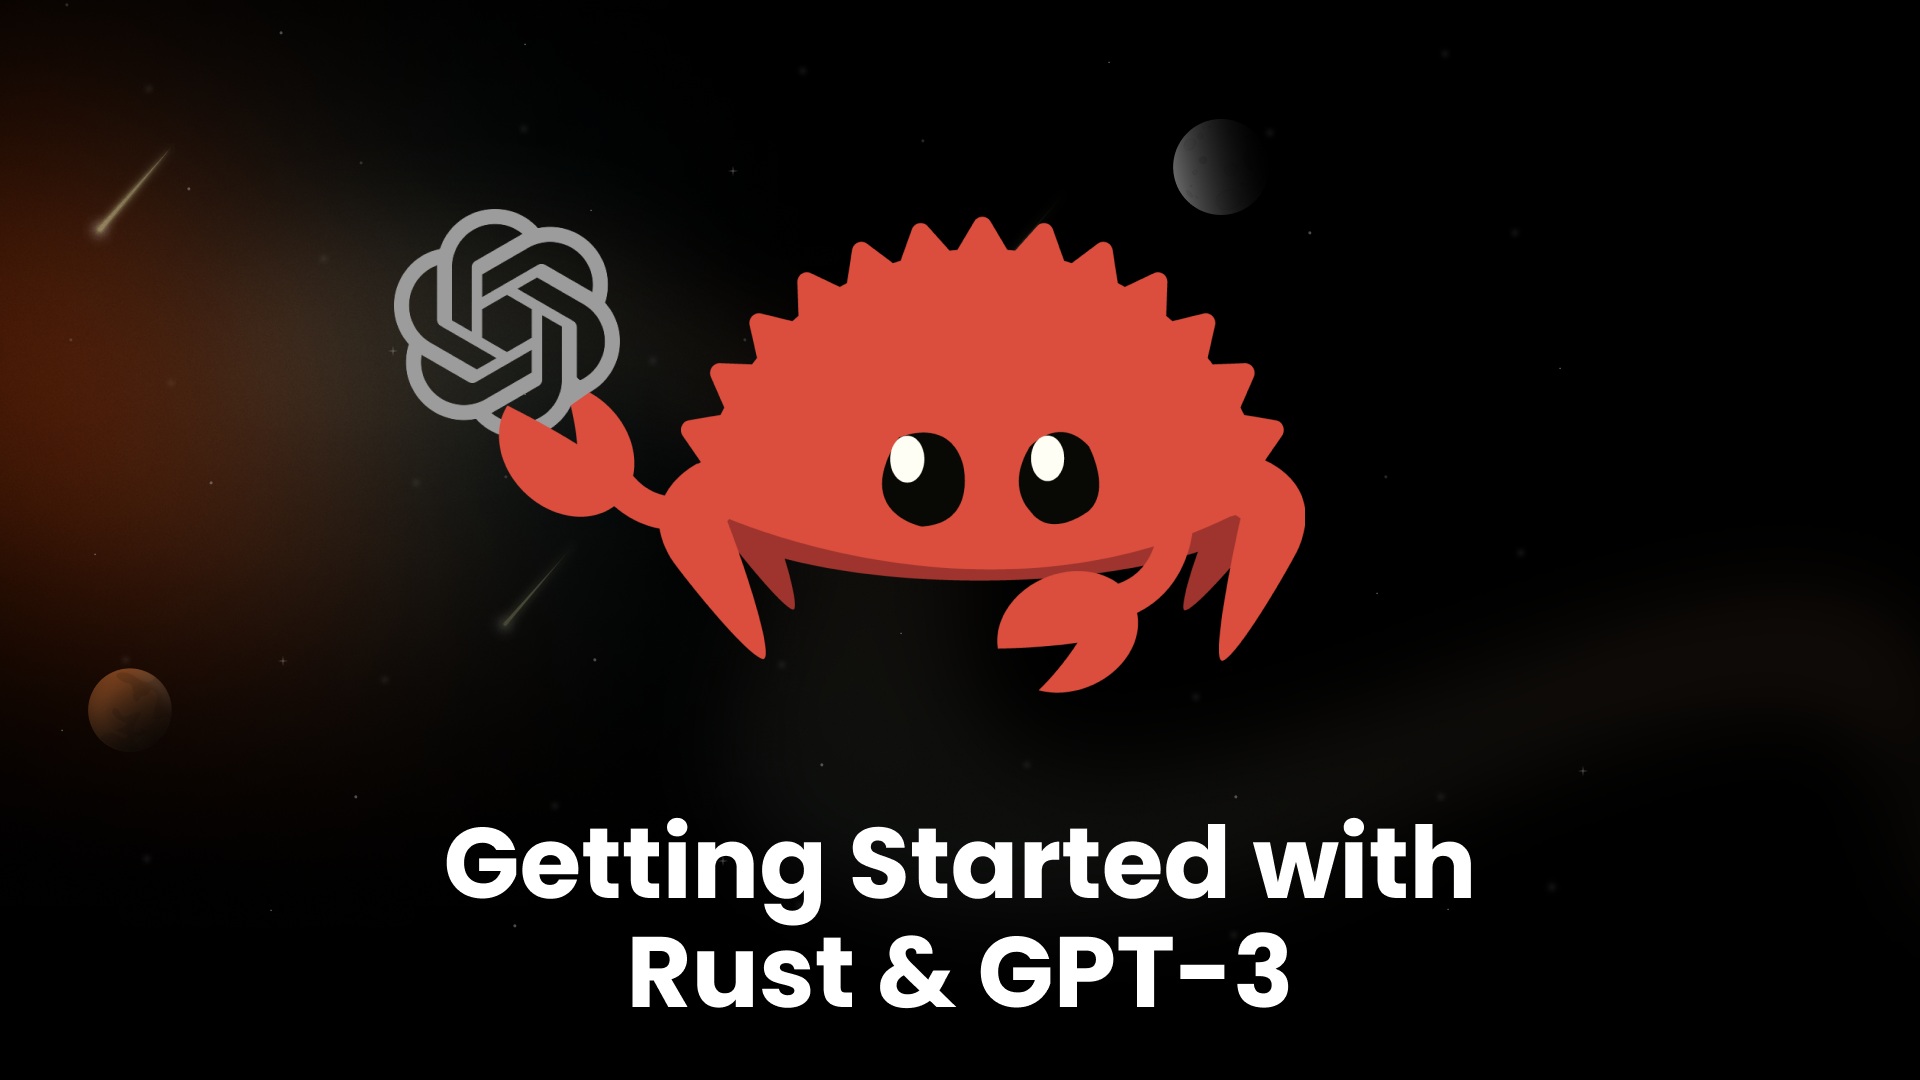 Getting Started with Rust & GPT-3